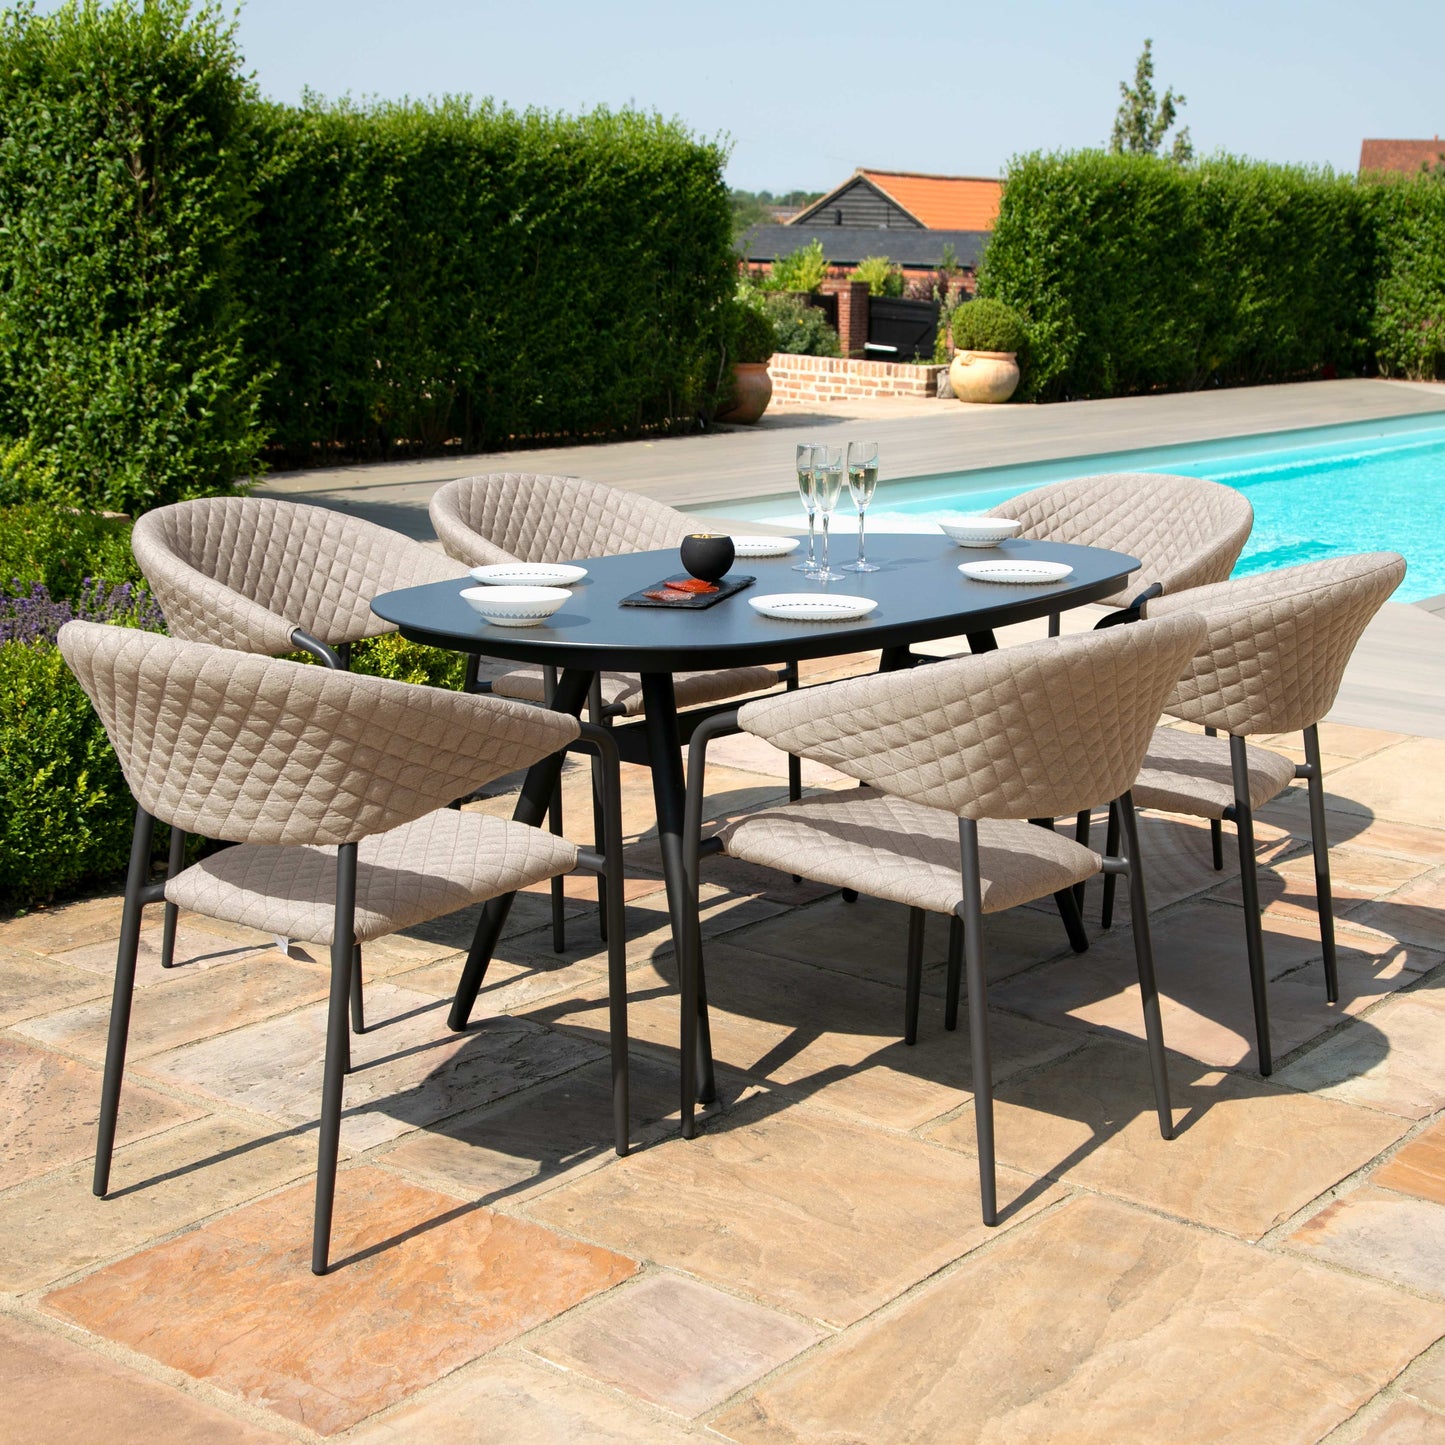 Outdoor Fabric Pebble 6 Seat Oval Dining Set